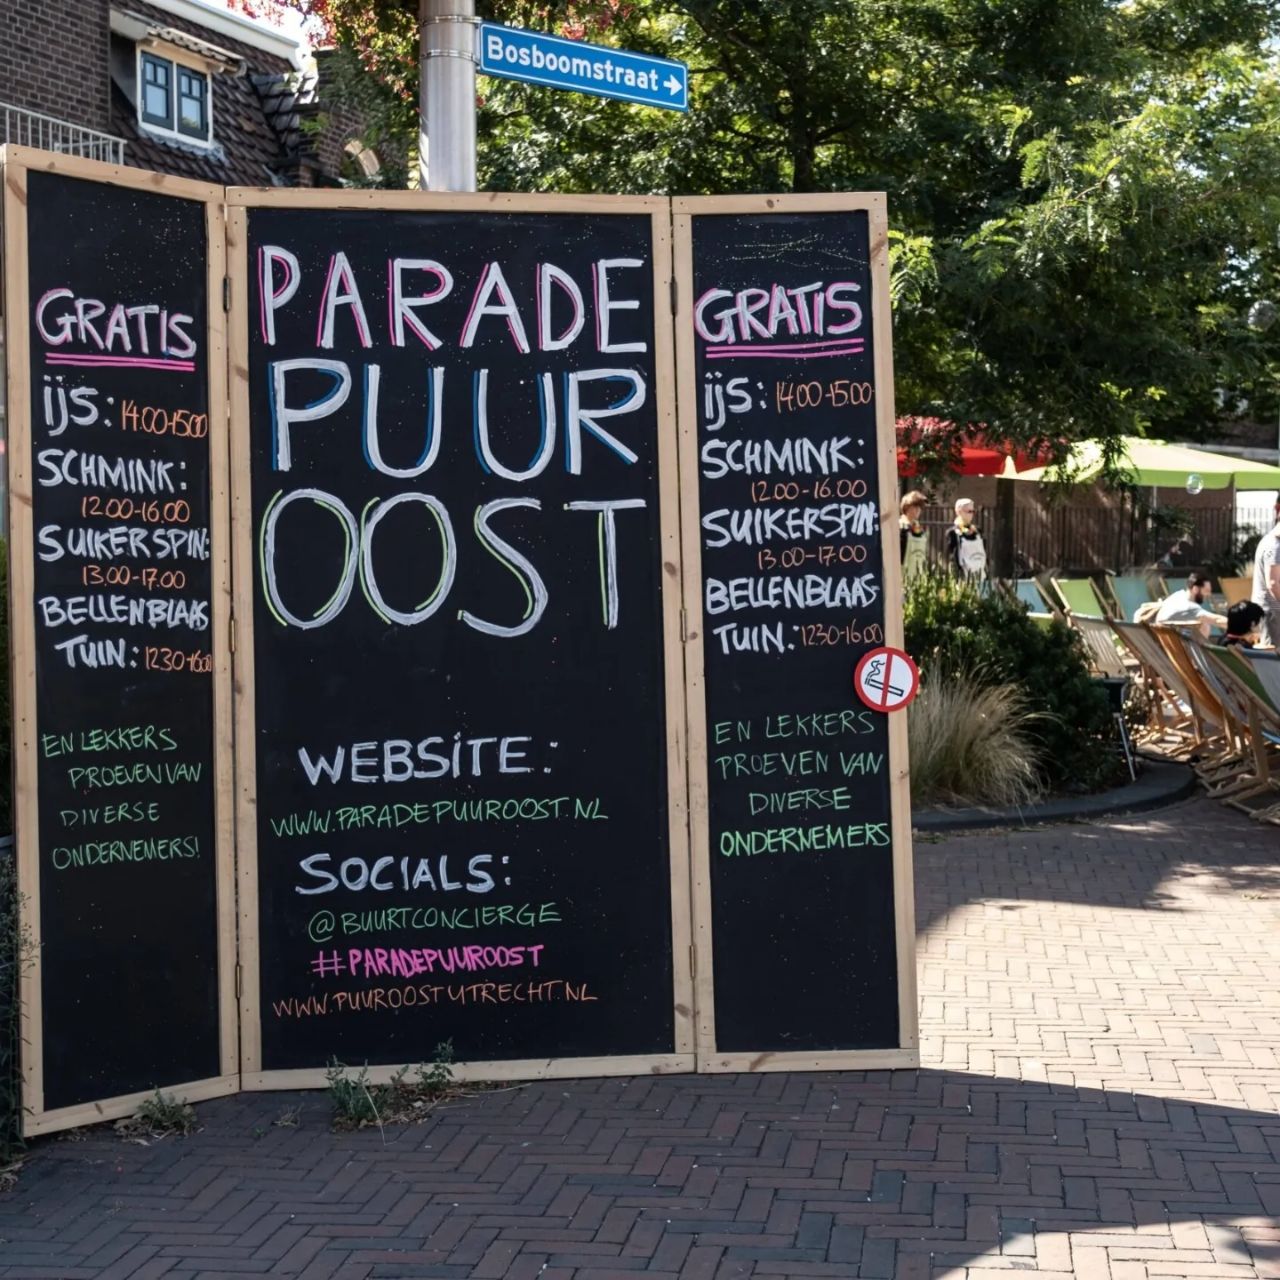 Parade Puur Oost